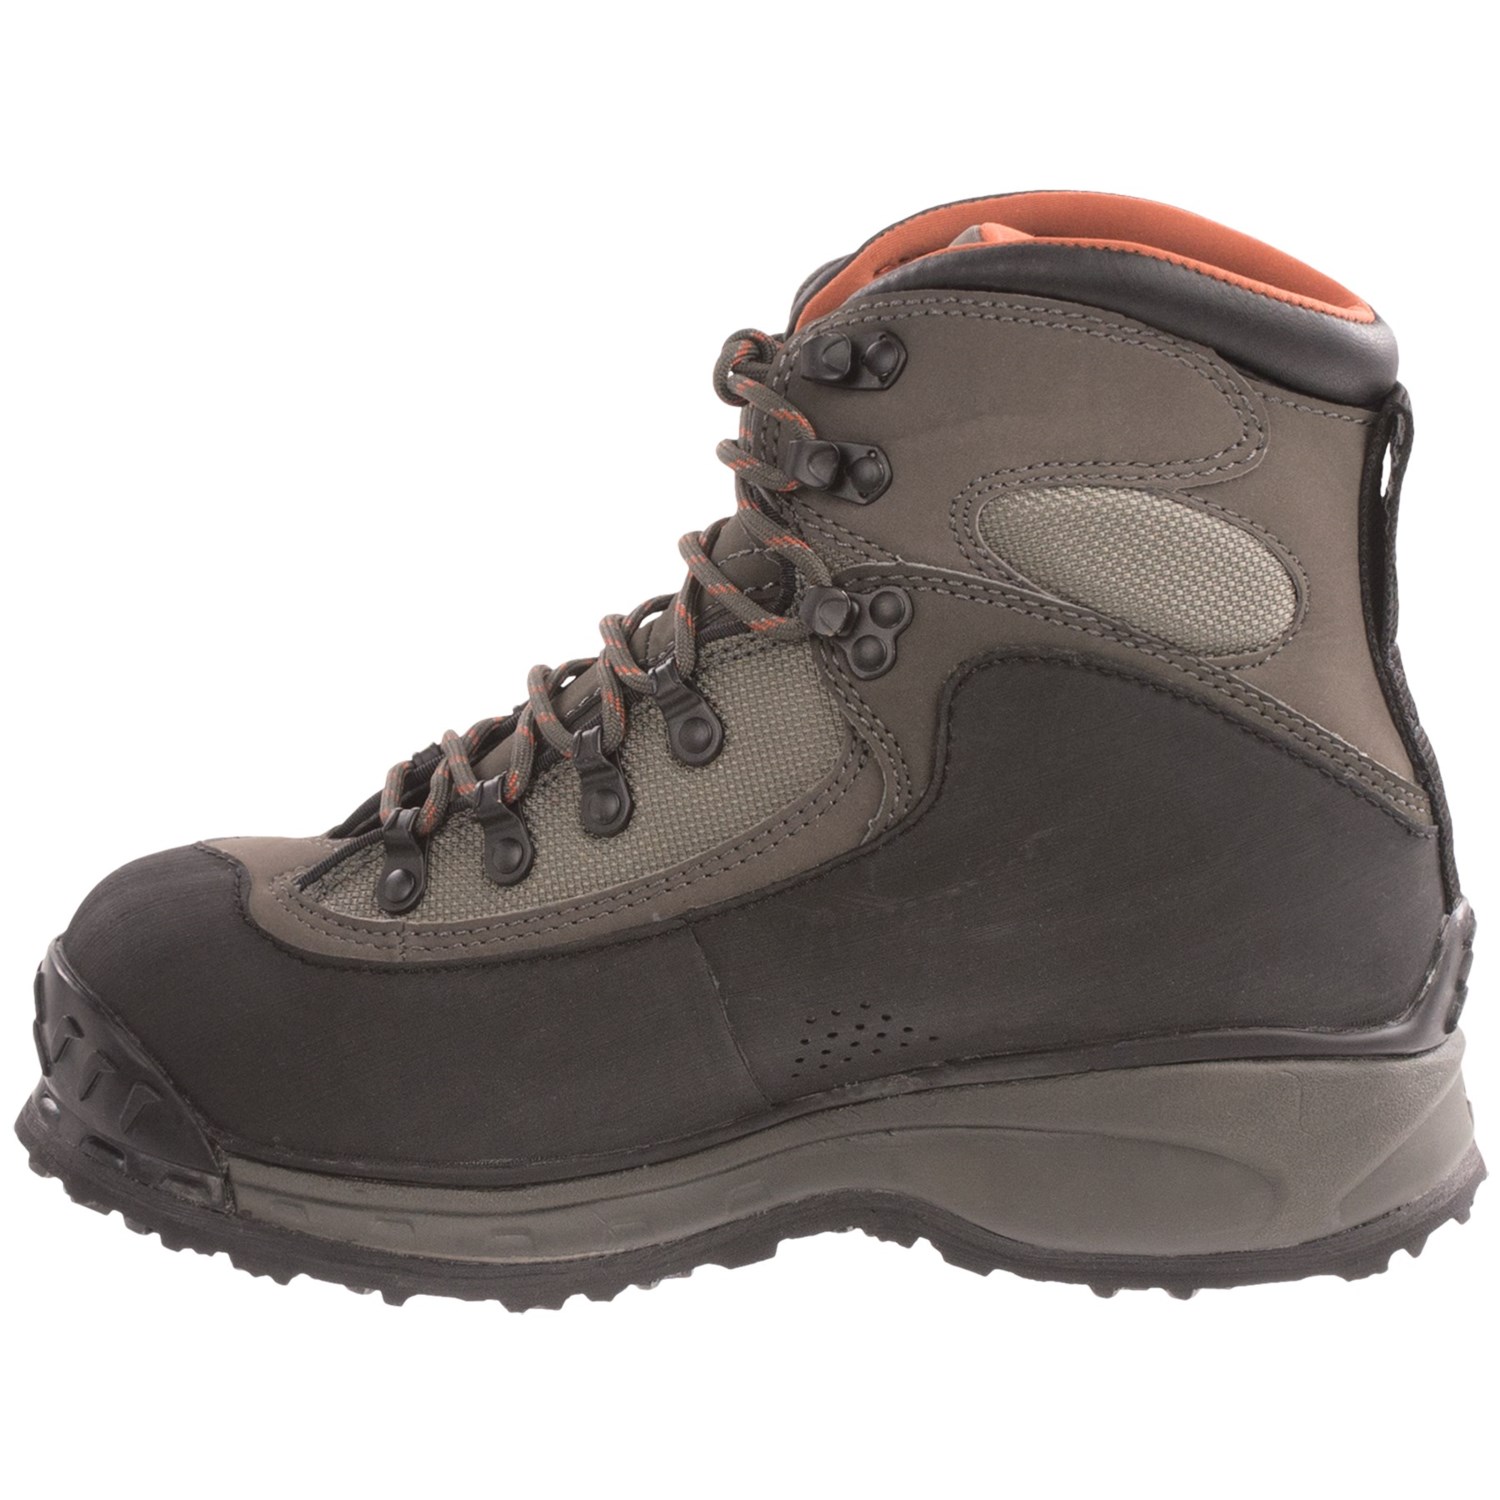 Simms Rivershed CleanStream Wading Boots (For Men and Women) 8360R ...